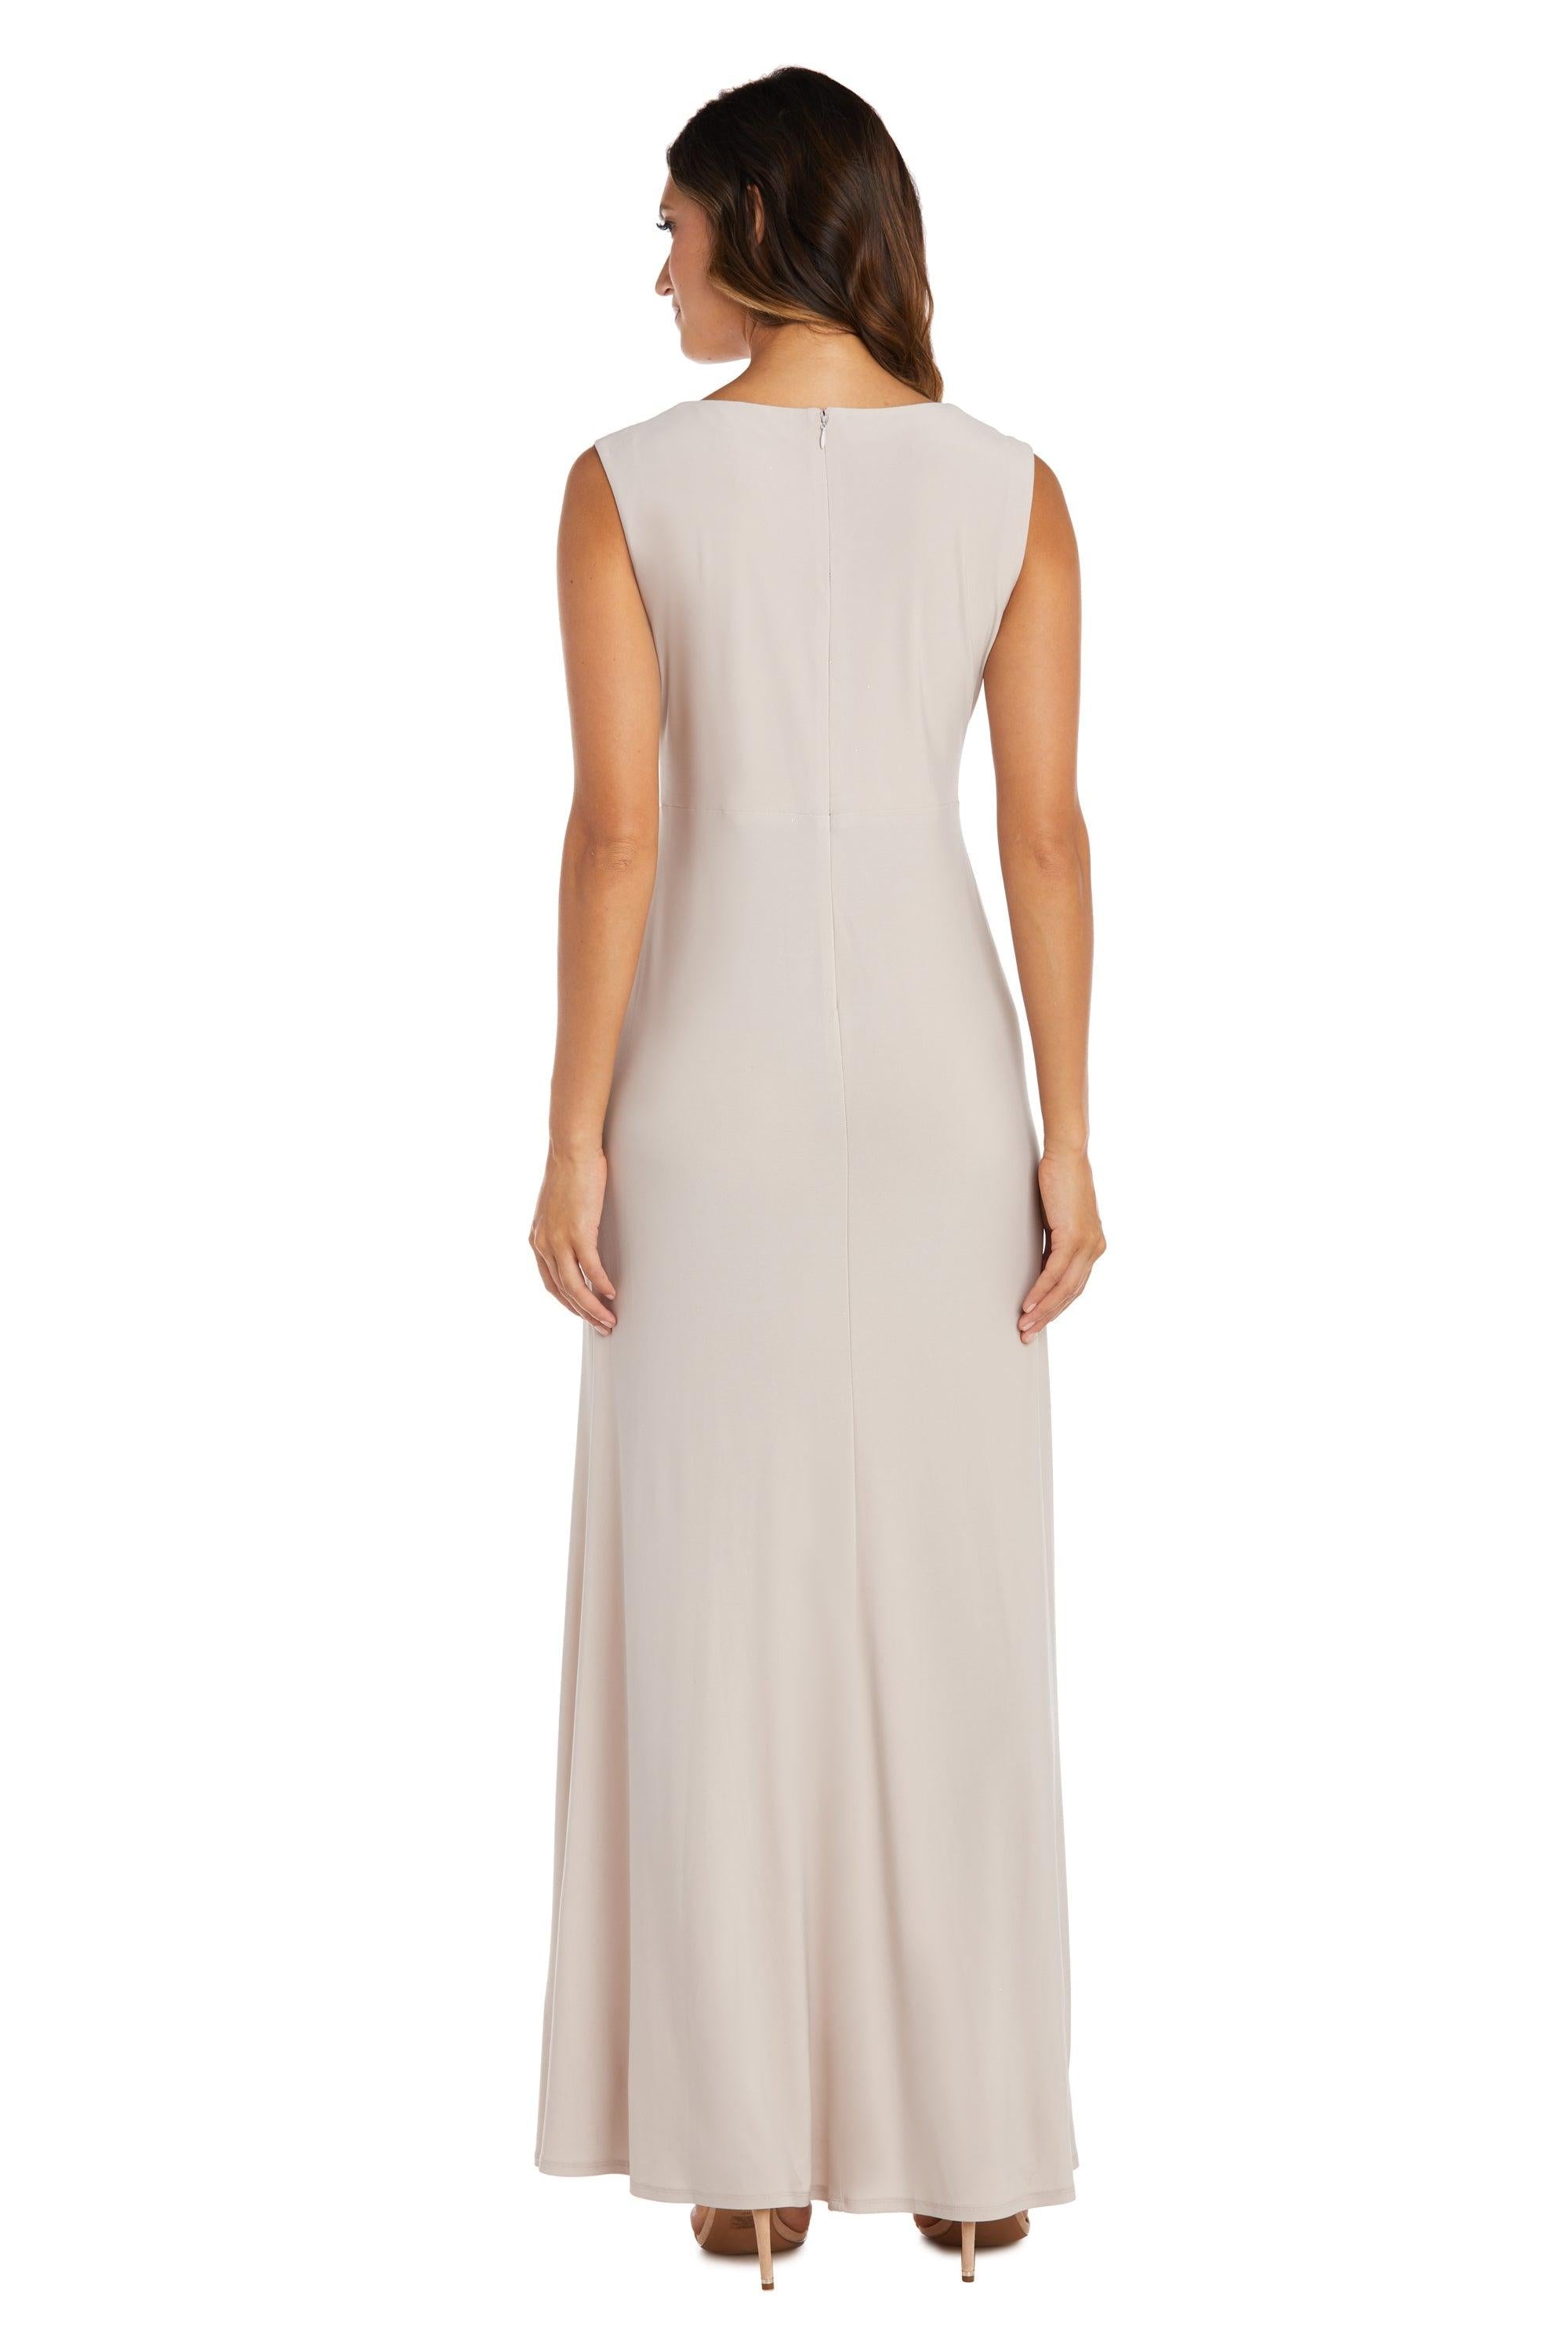 R&M Richards Long Mother of the Bride Dress 3785 - The Dress Outlet